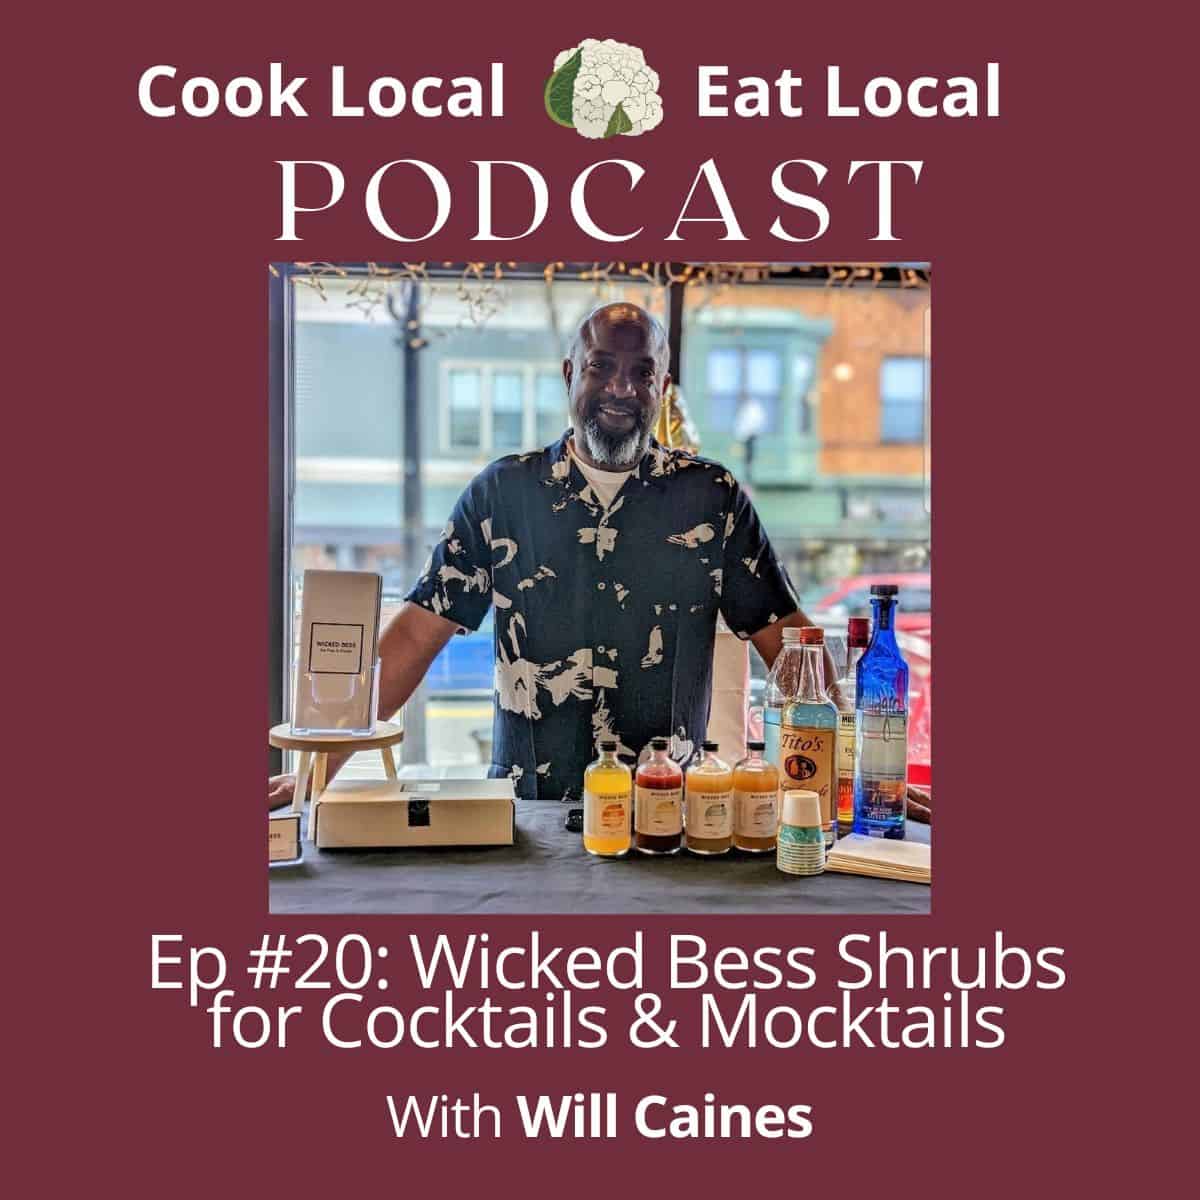 Cook Local Eat Local podcast cover with a photo of guest, Will Caines, with his Wicked Bess Shrubs arranged on a bar.